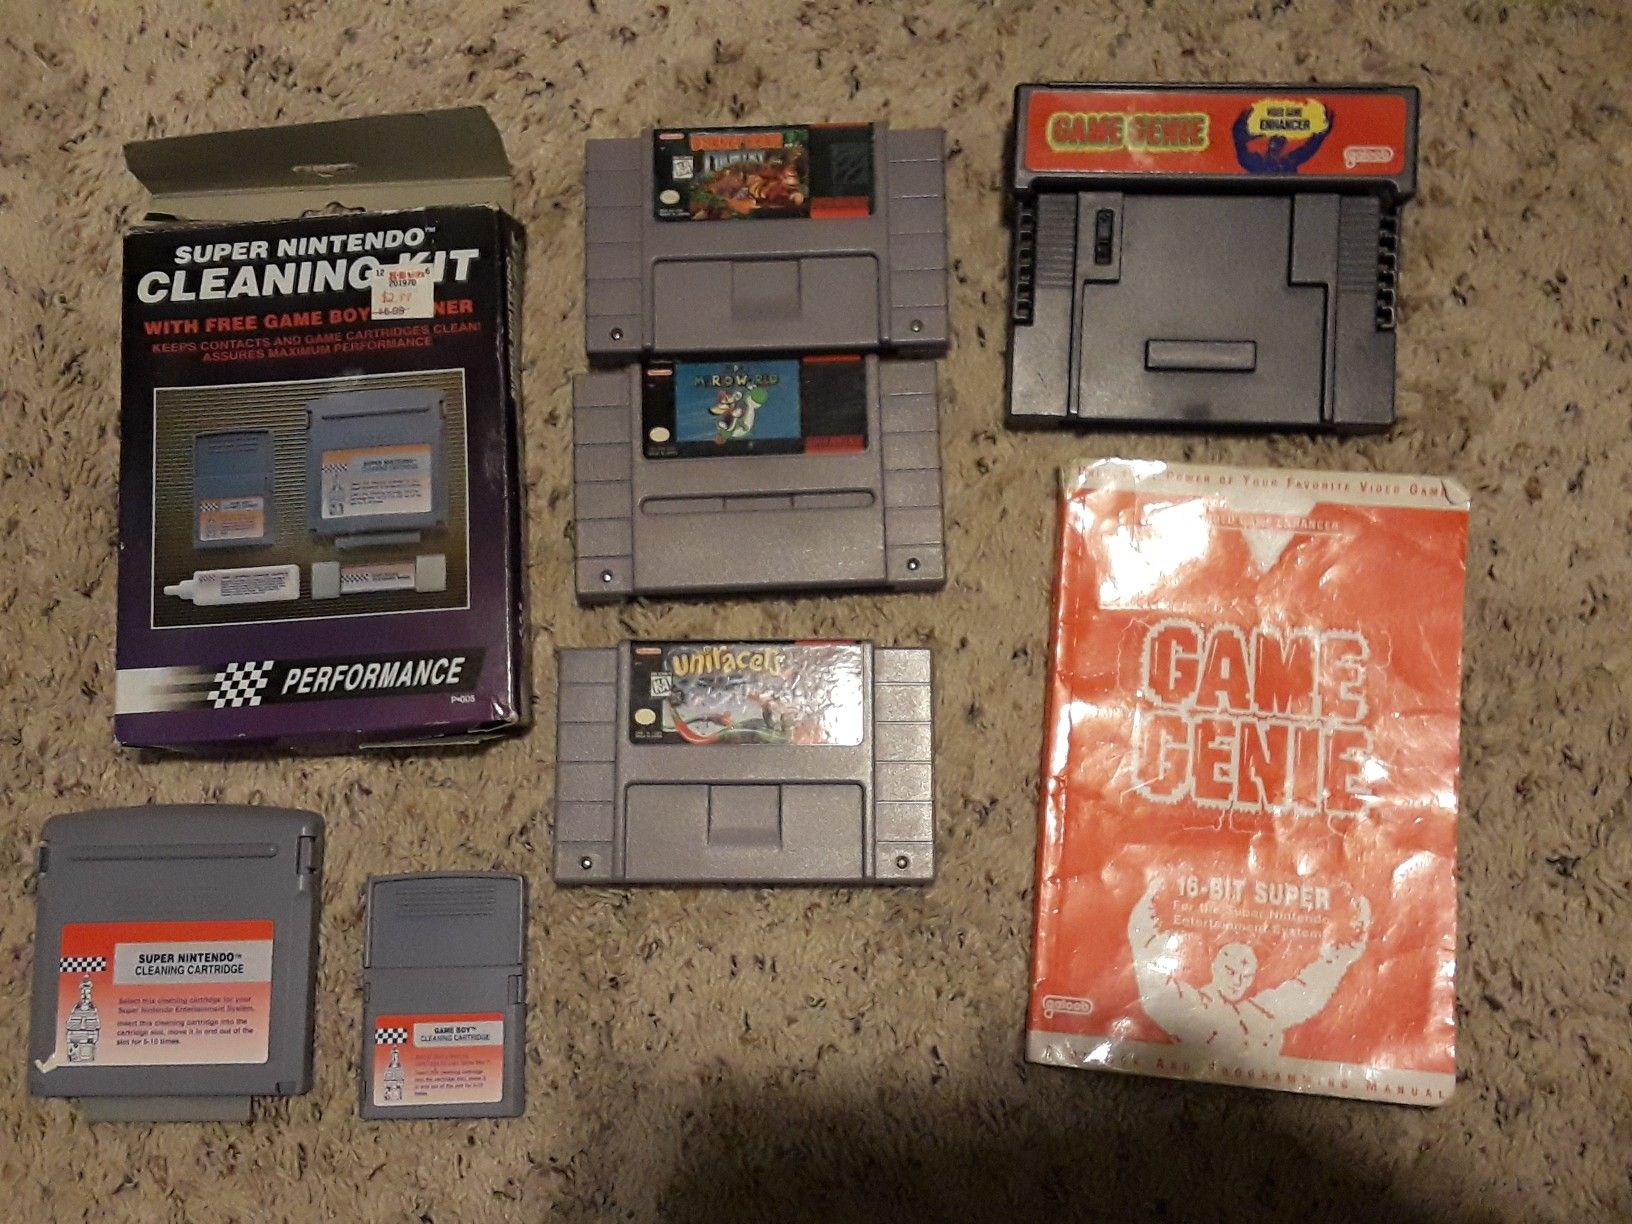 SNES games game genie and cleaning kit